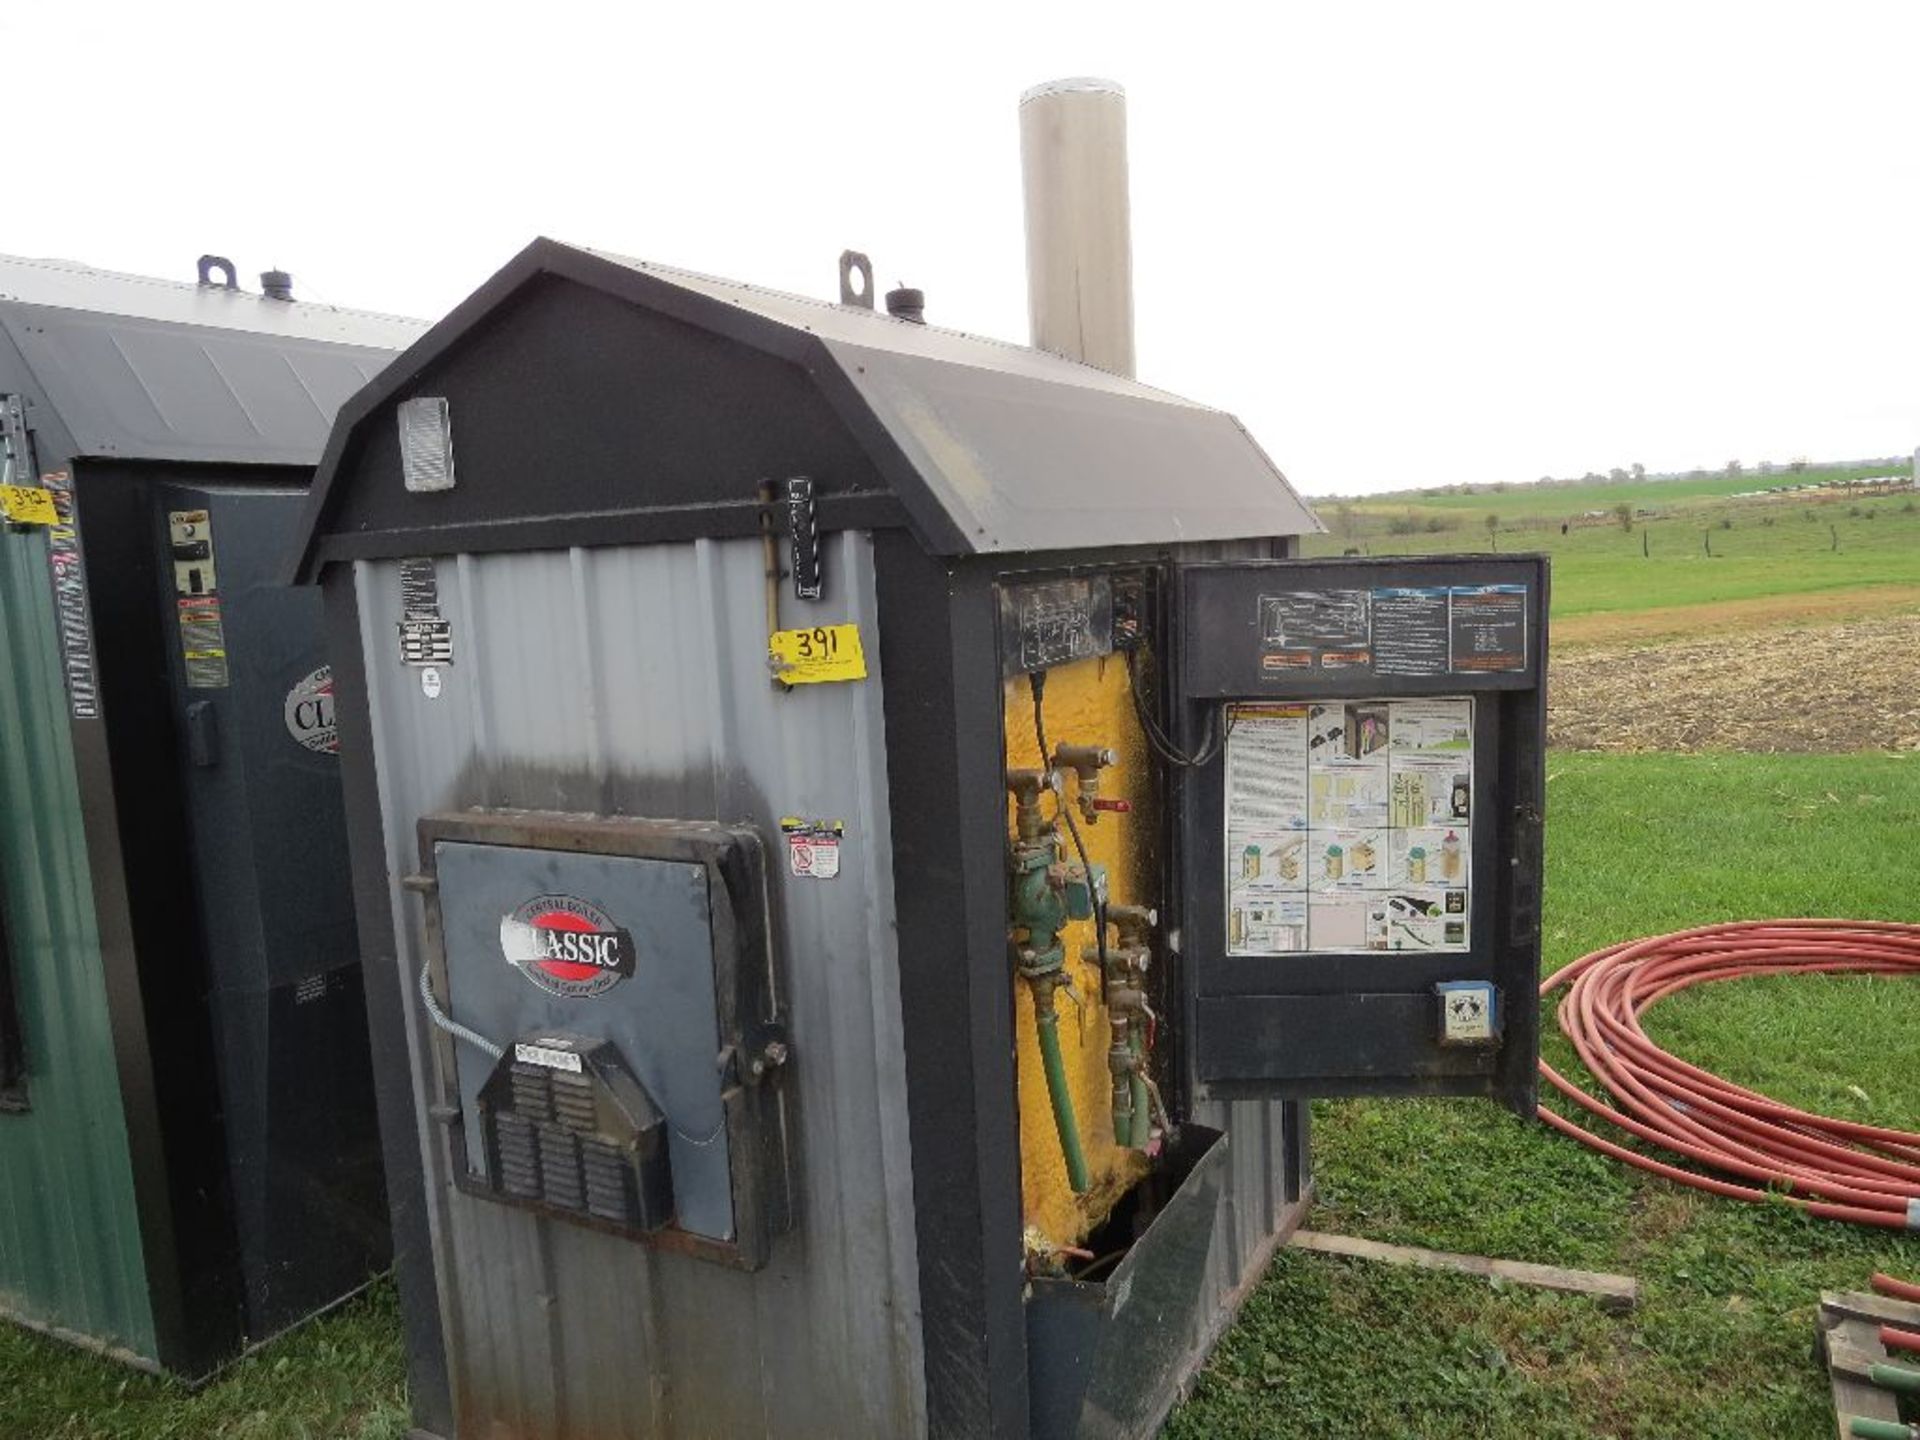 2007 Central boiler classic 5036 outdoor wood furnace, used.